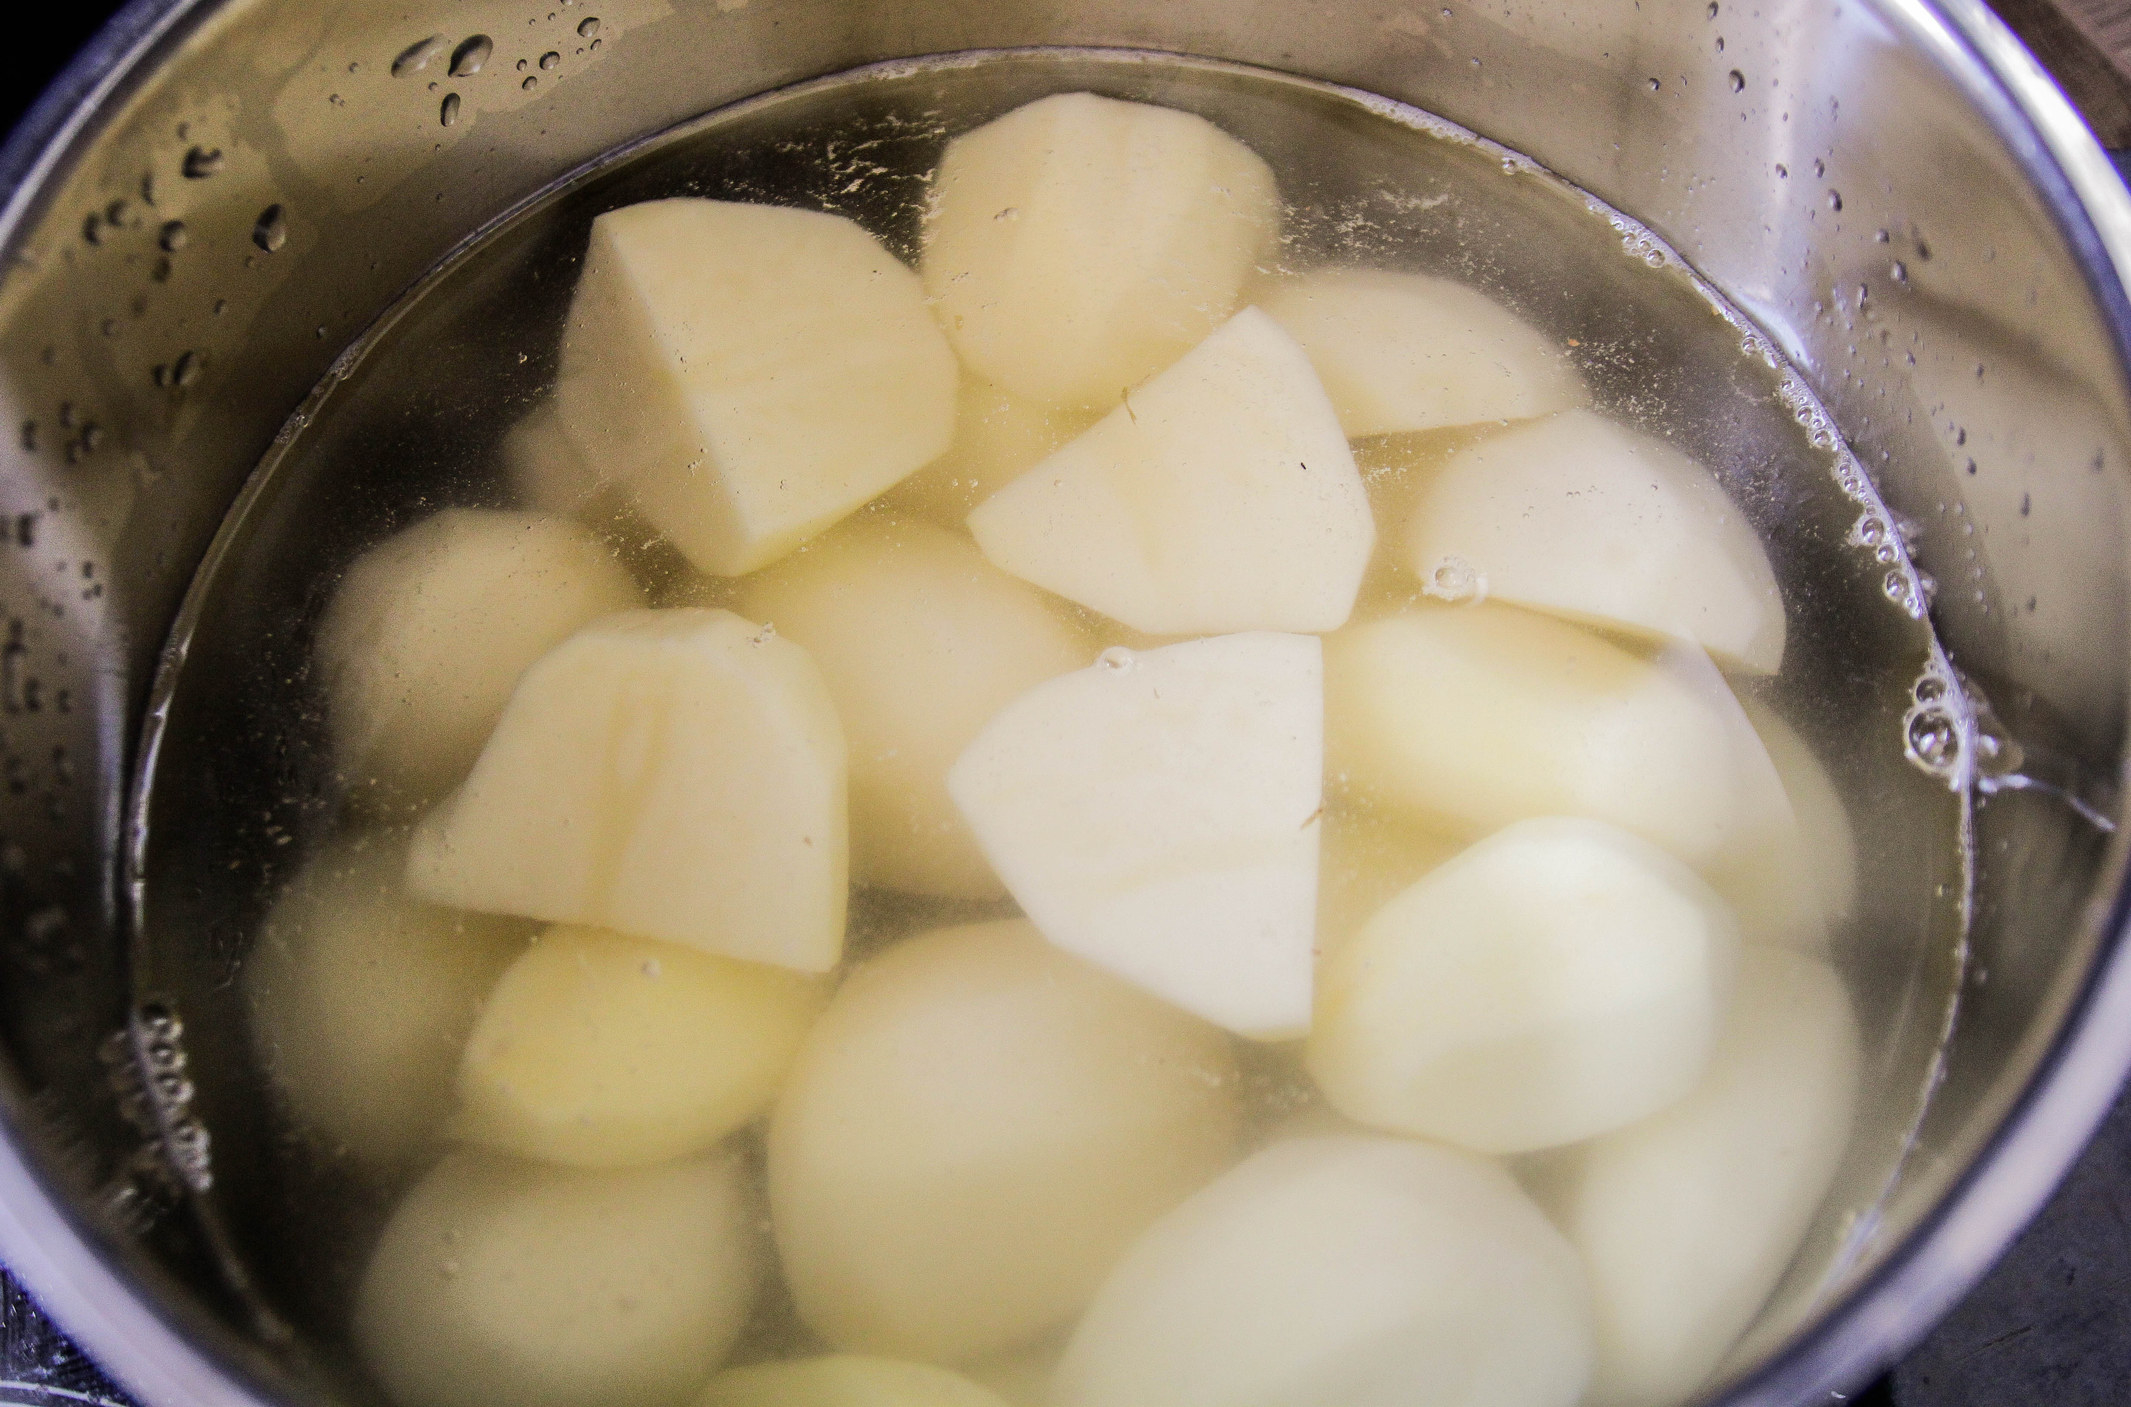 Boiling baked potatoes in a pot of water.